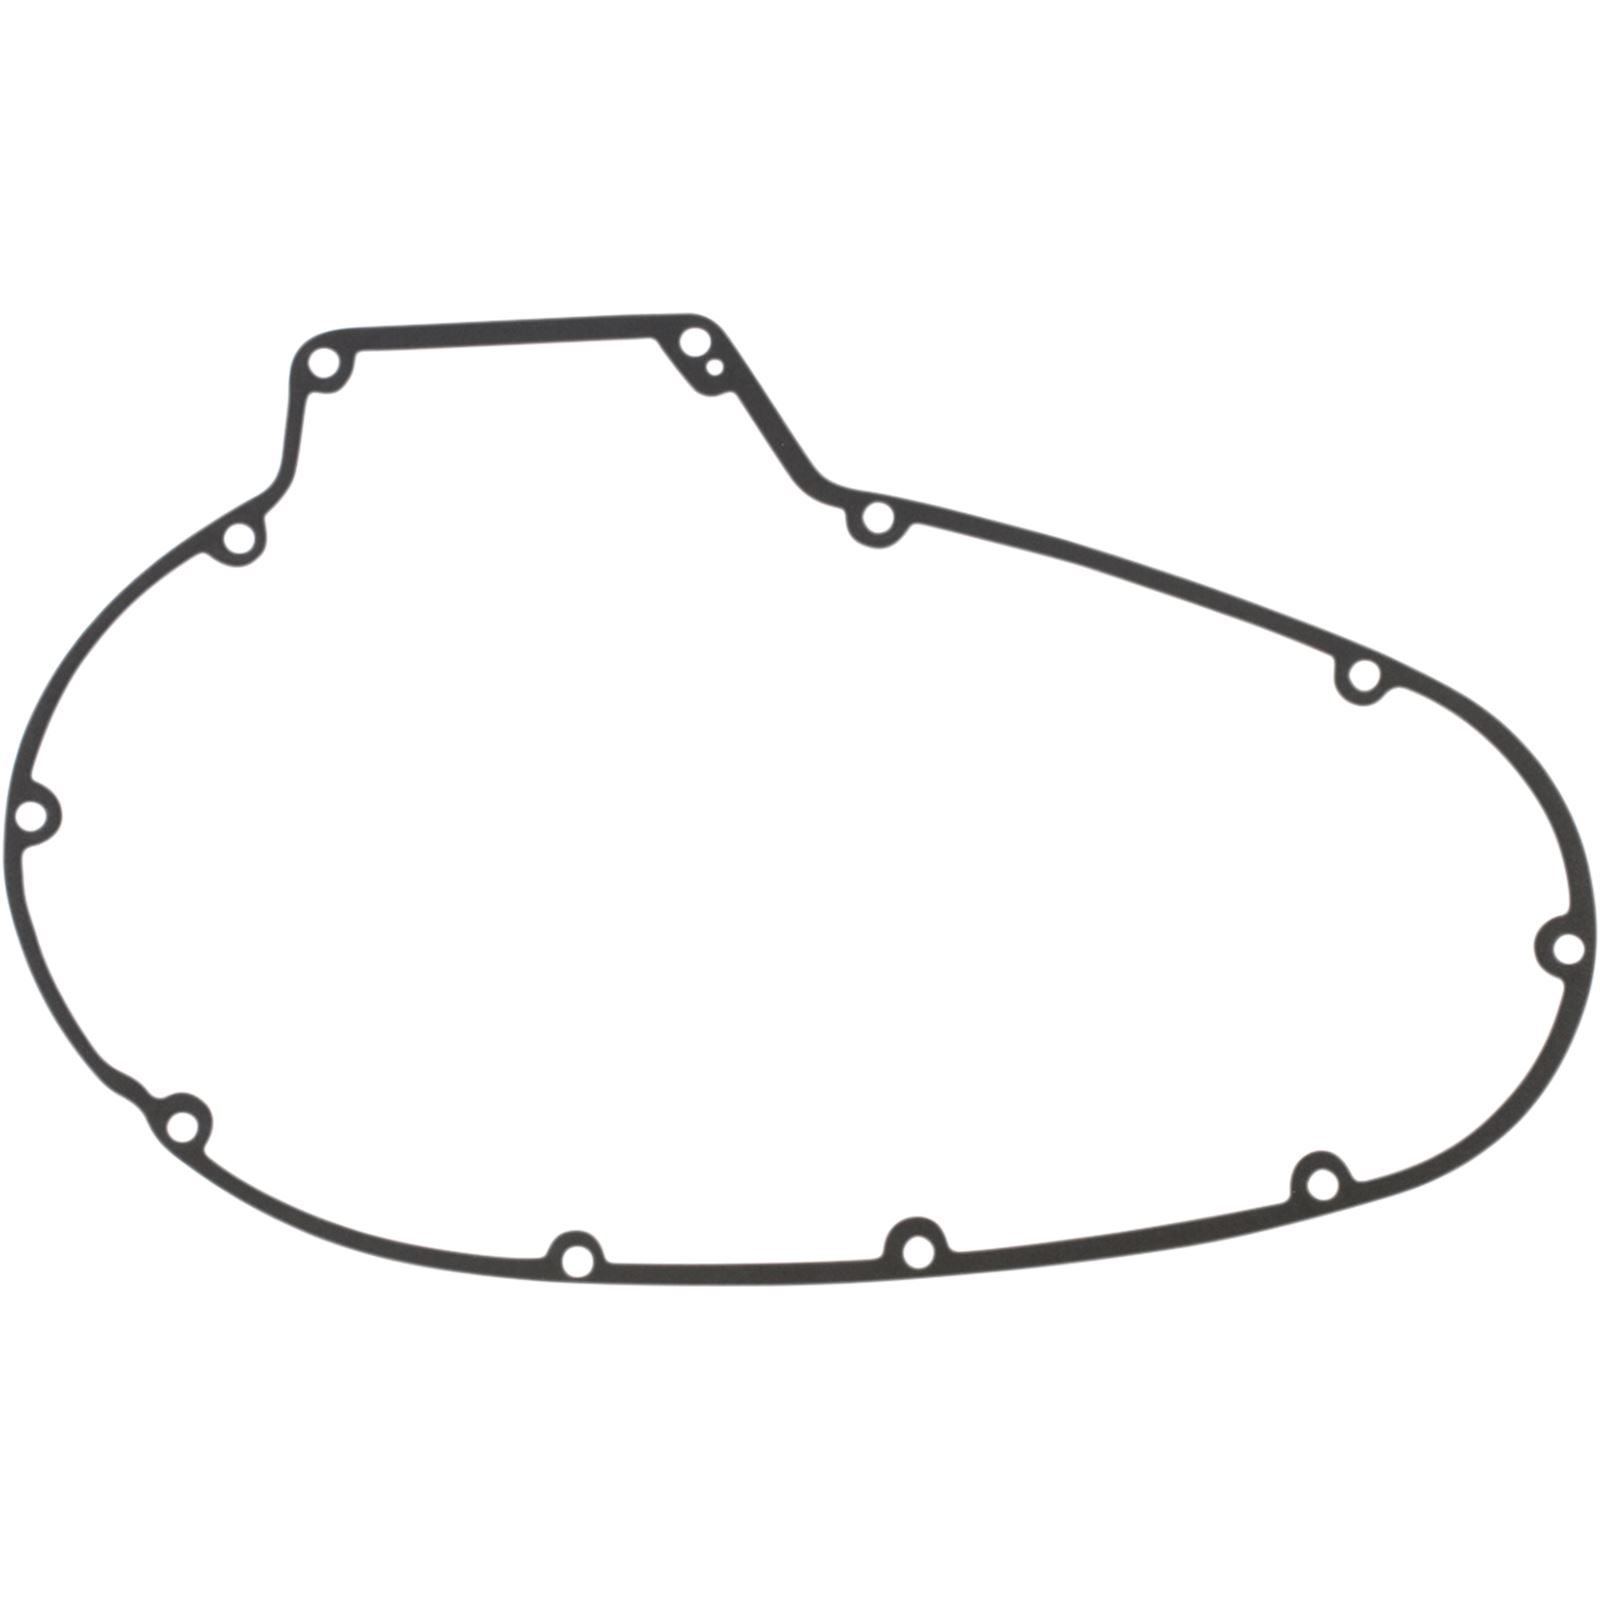 Cometic Primary Cover Gasket